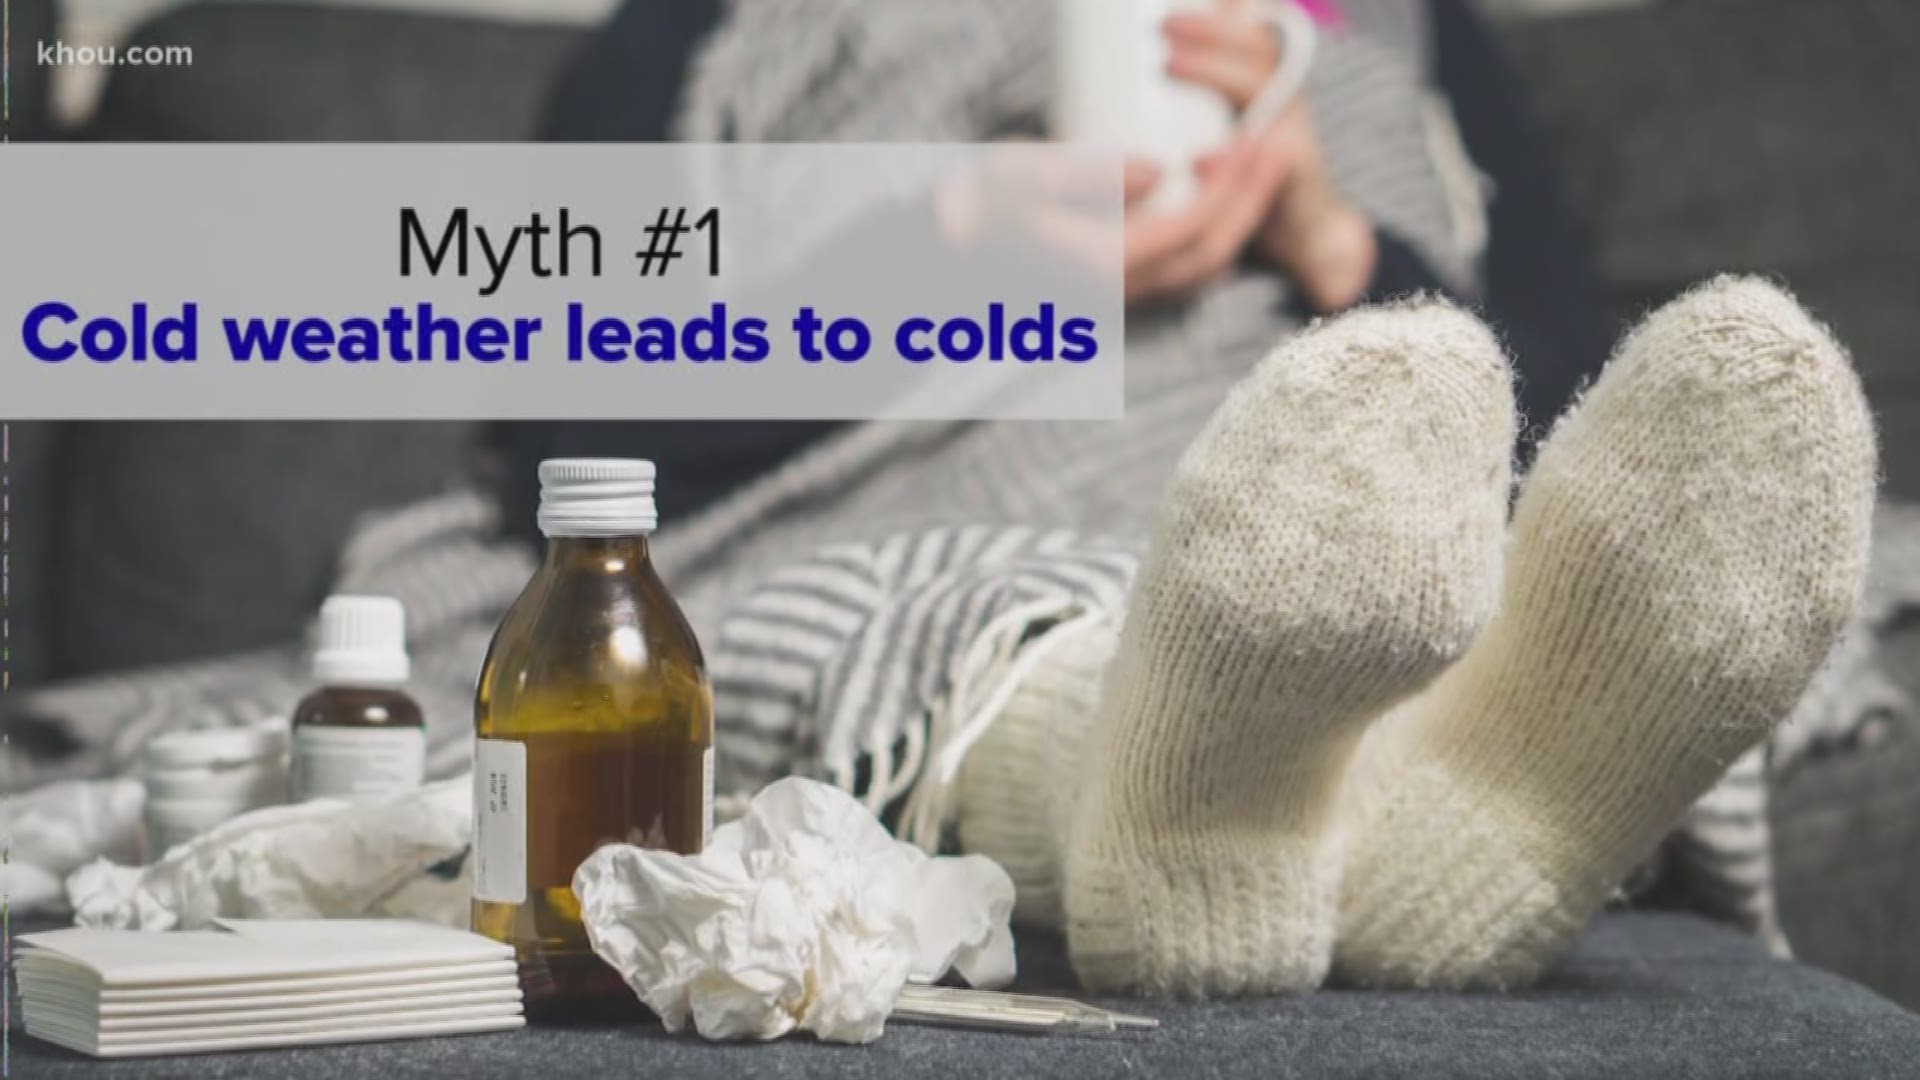 Fall weather has arrived! When temperatures drop, people tend to bring up cold weather myths that have been talked about for generations.